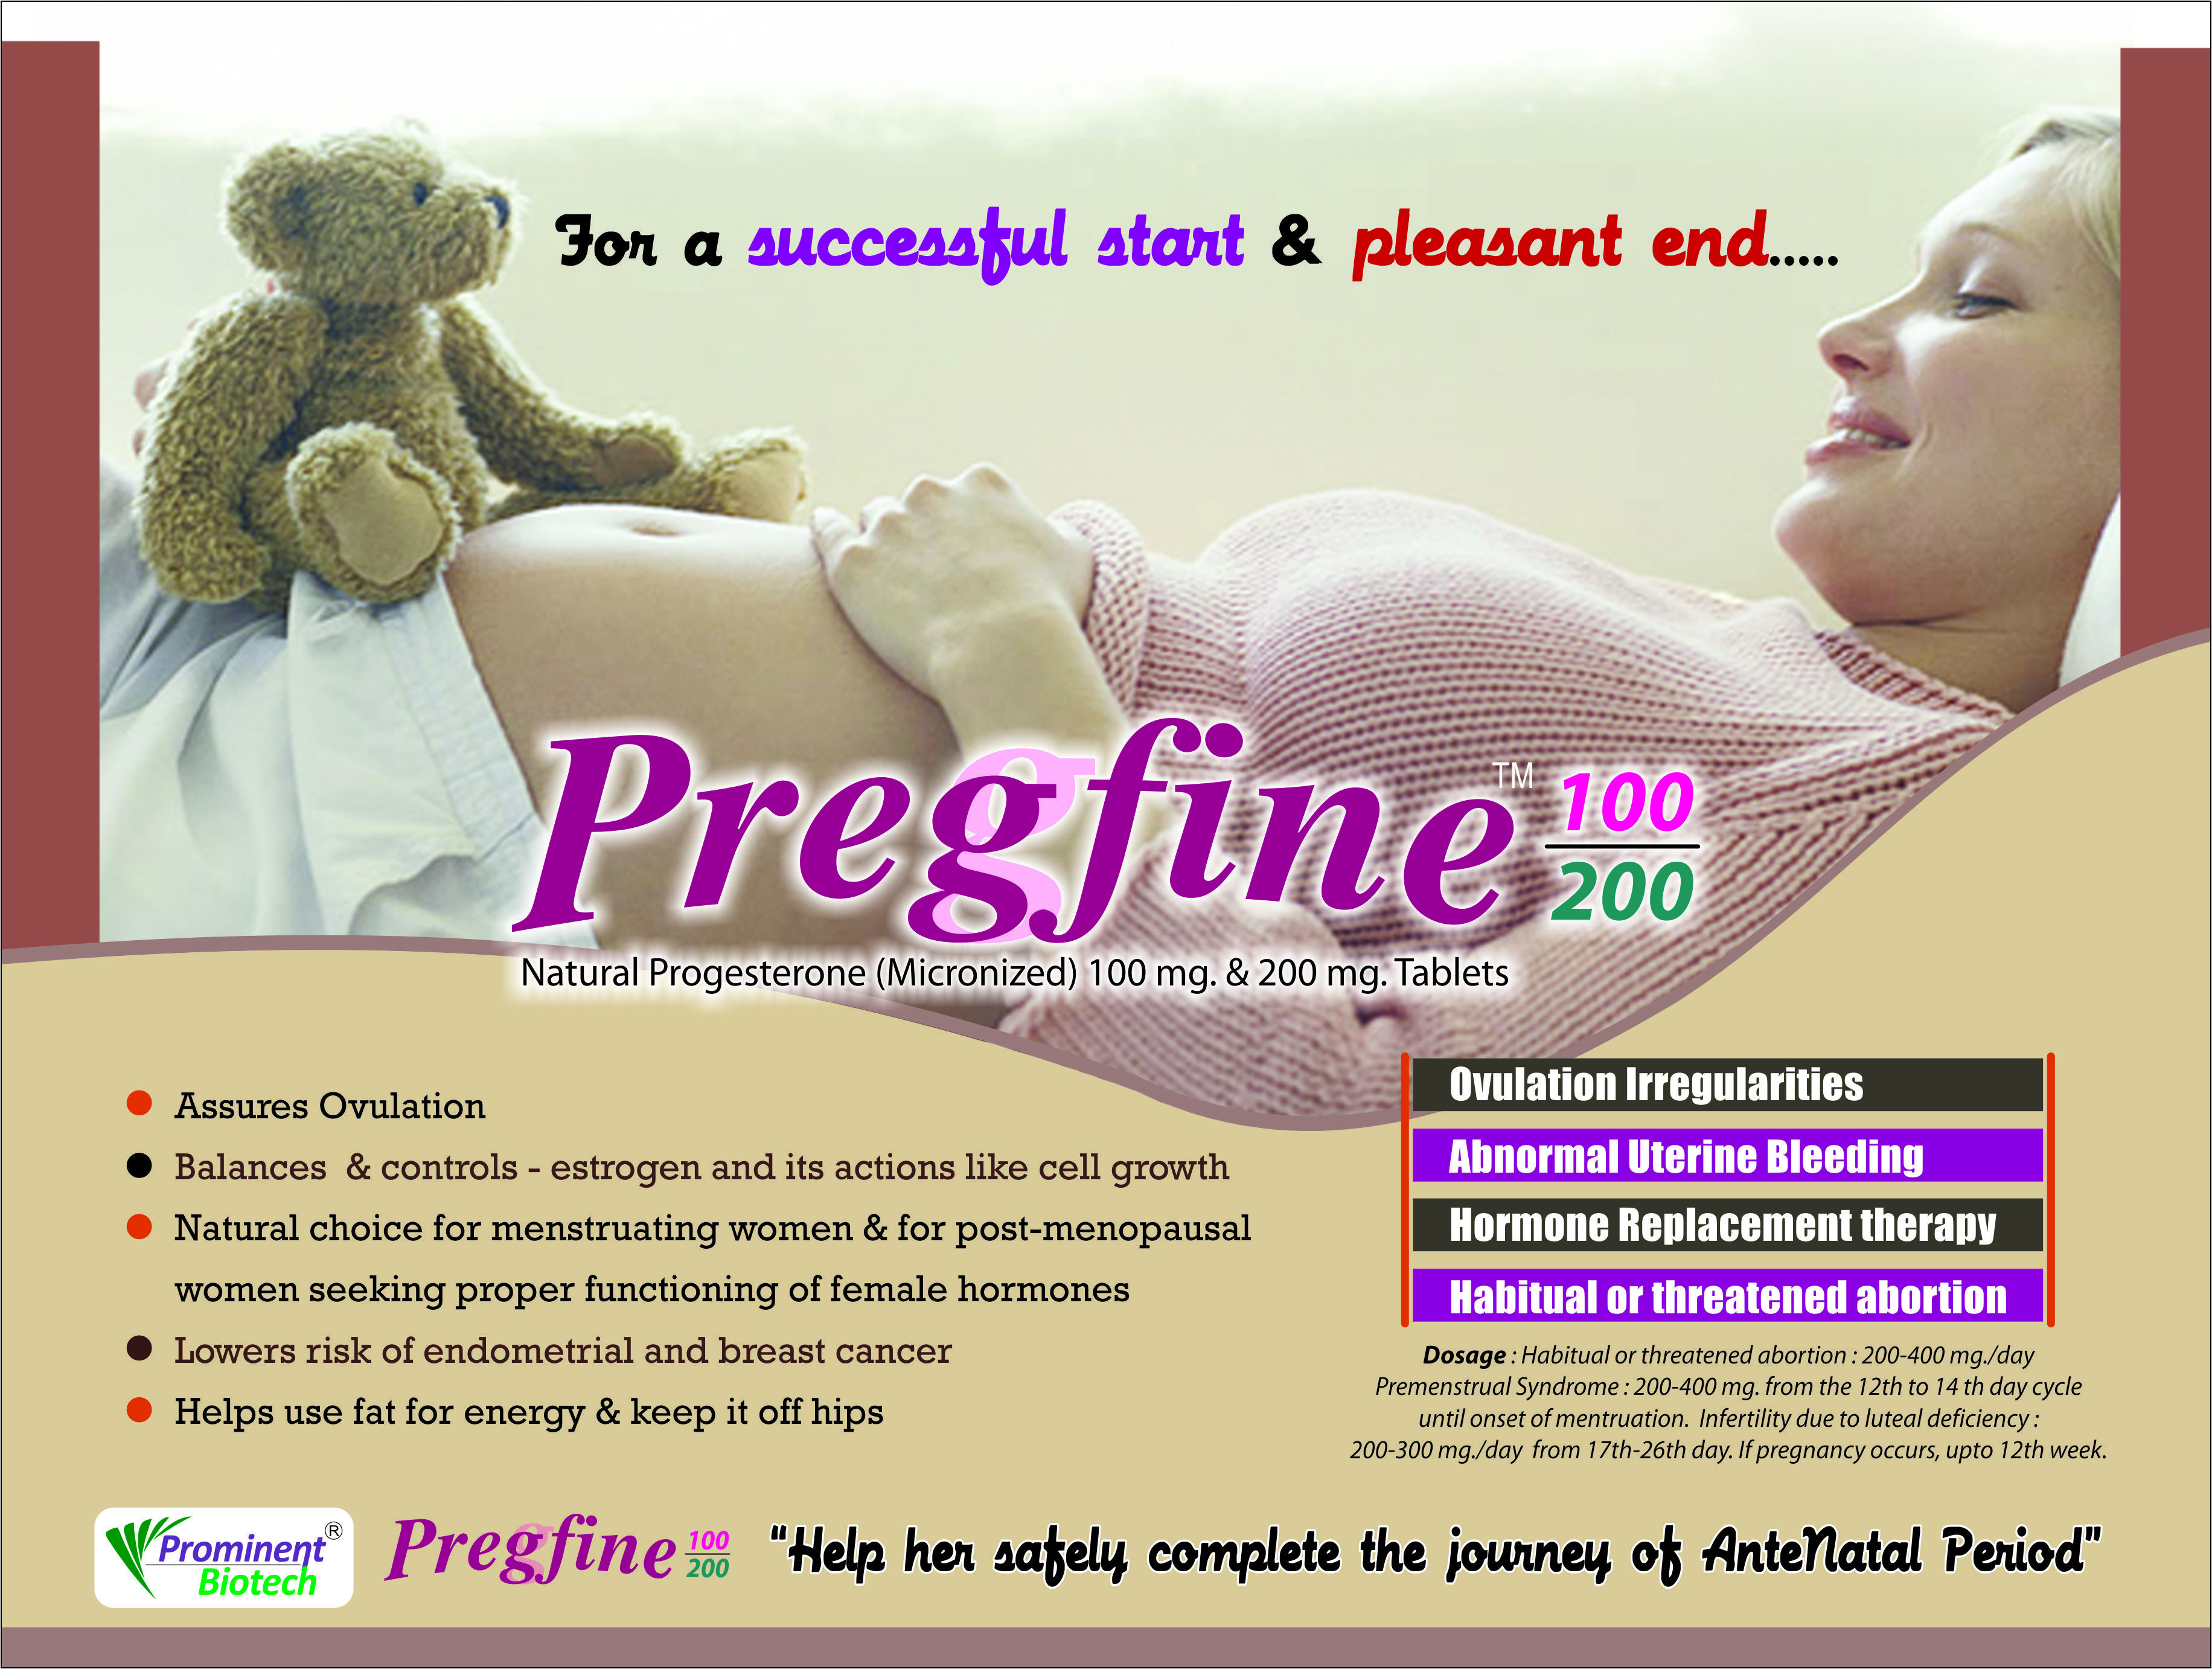 Natural Progesterone (Micronized) 100 Mg & 200 mg Tablets